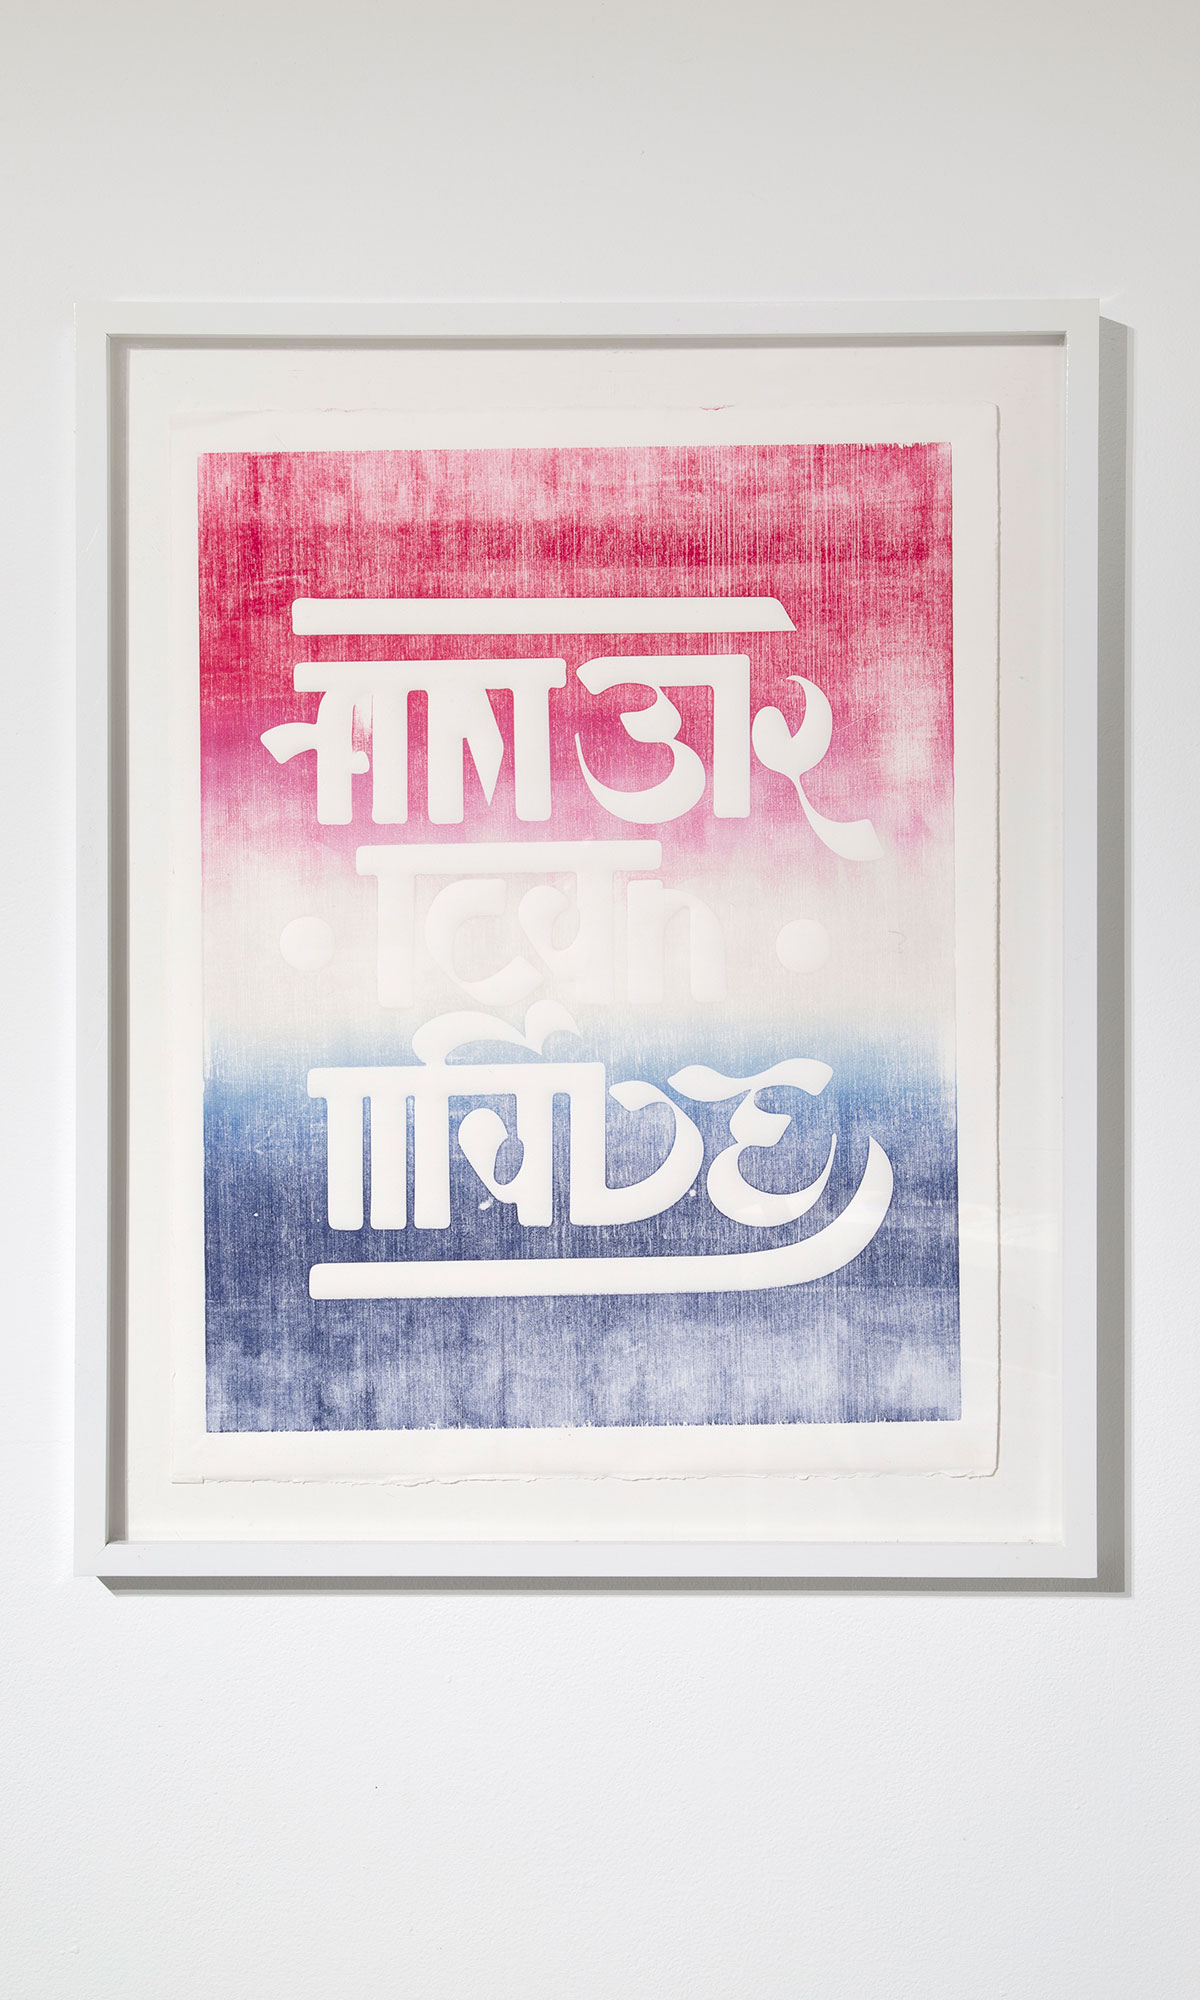 American Made (redwhiteblue), 2021, Screenprint and embossed on paper